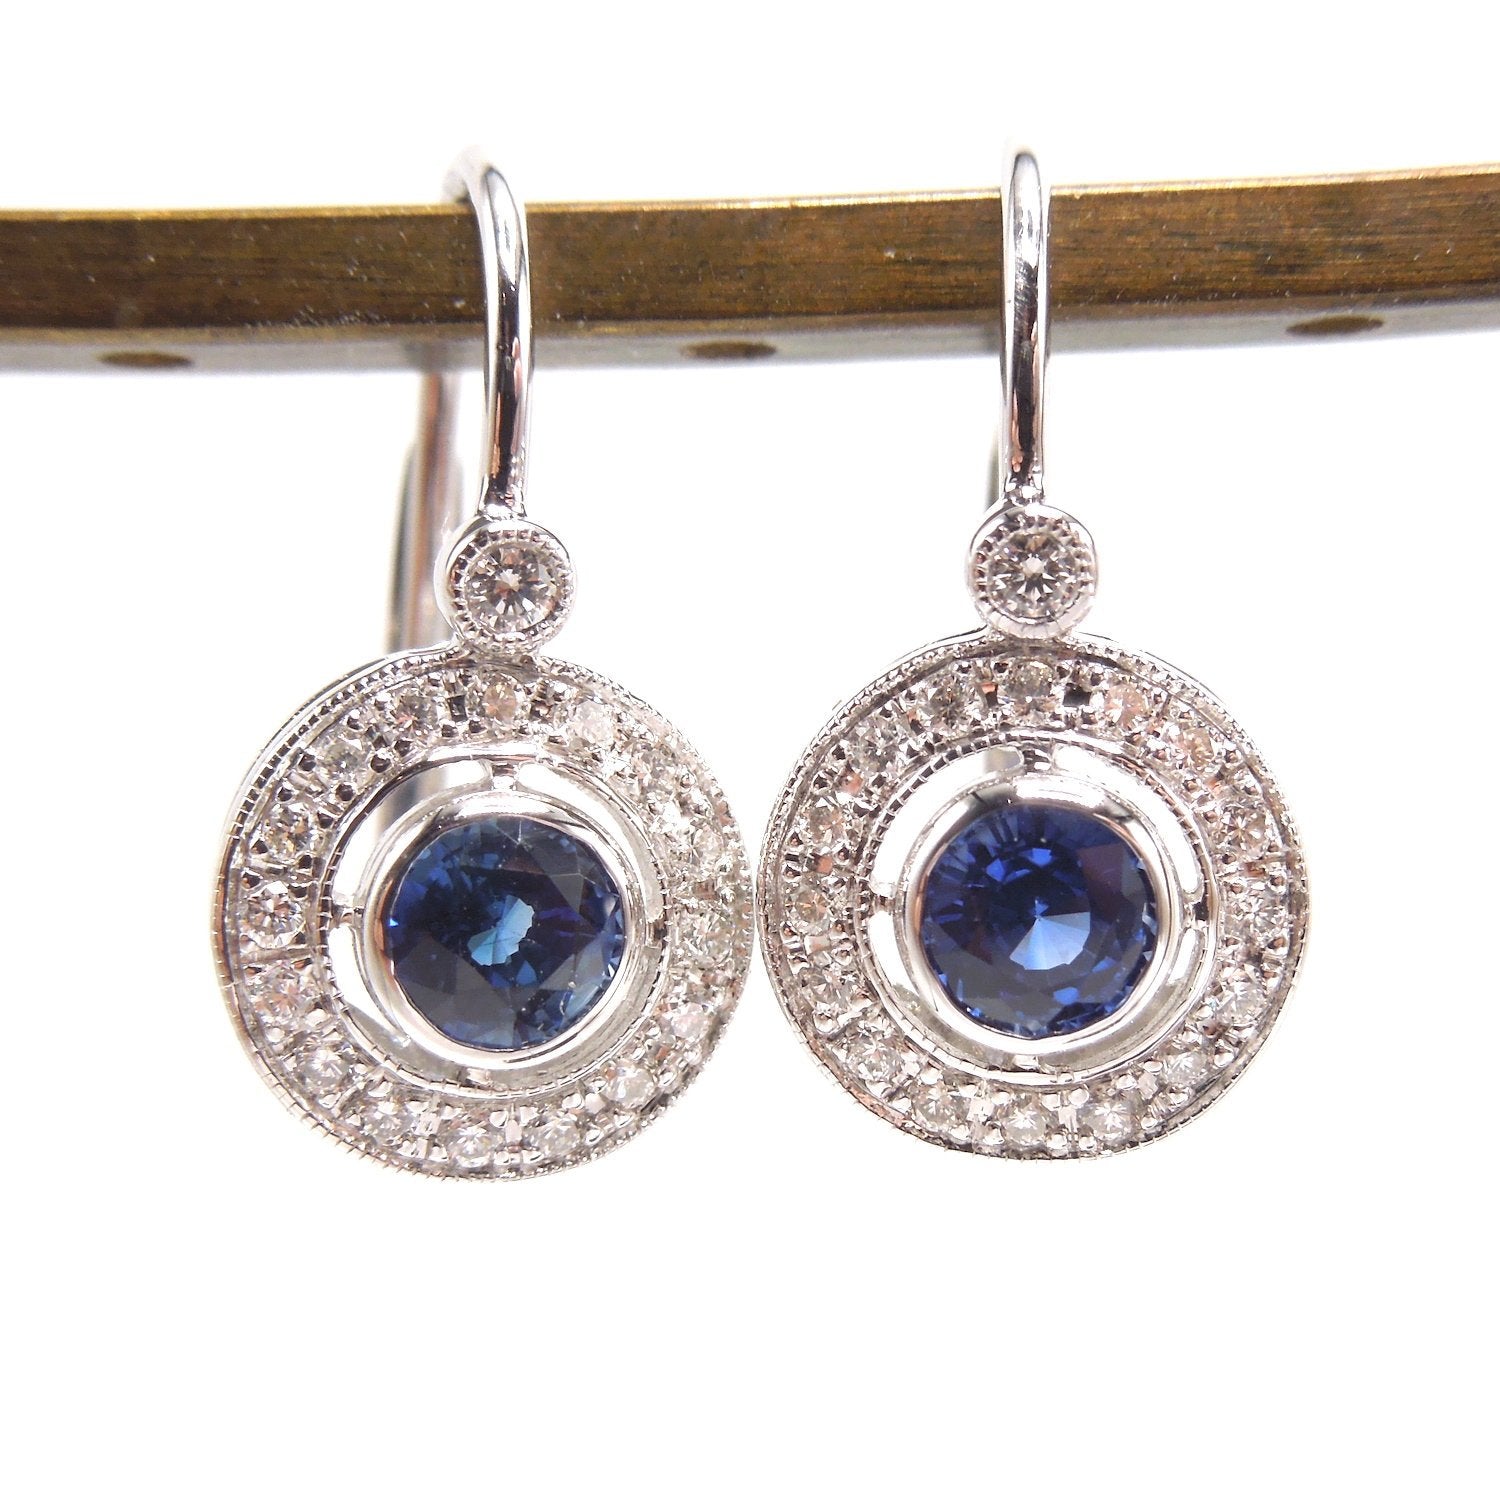 Art Deco Style Diamond and Sapphire Lever Back Drop Earrings